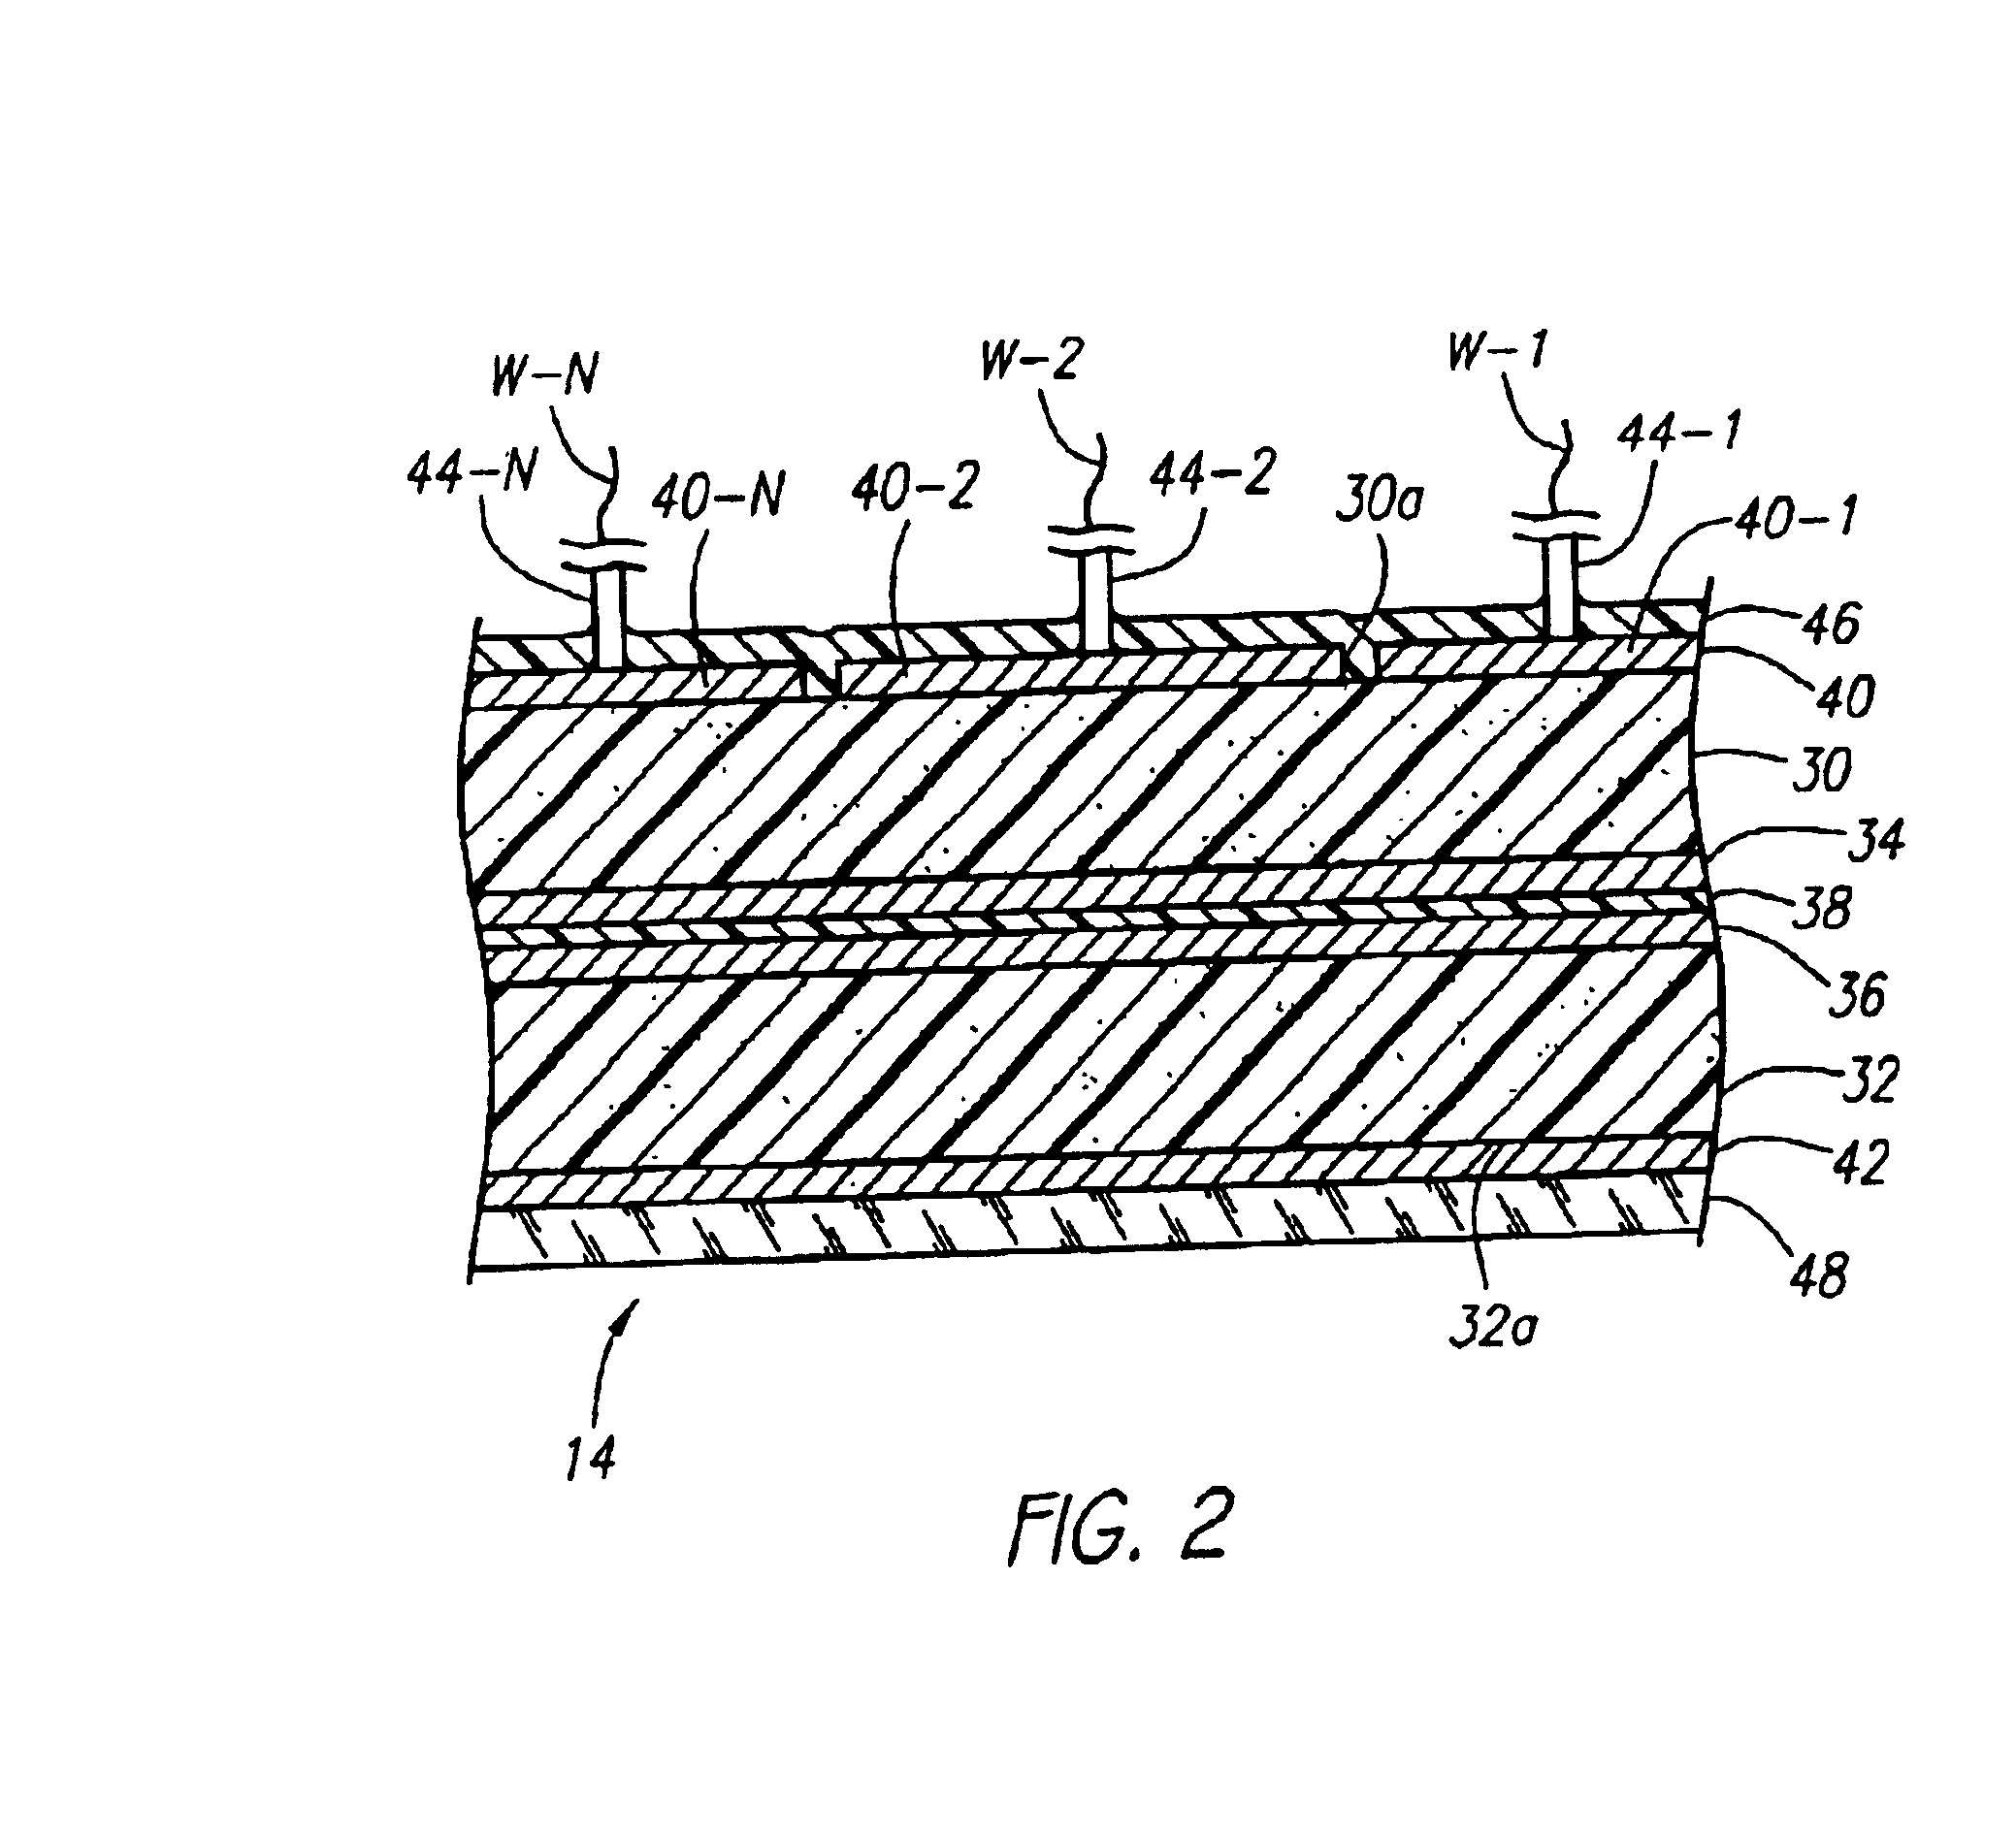 Deformable curvature mirror with unipolar-wiring